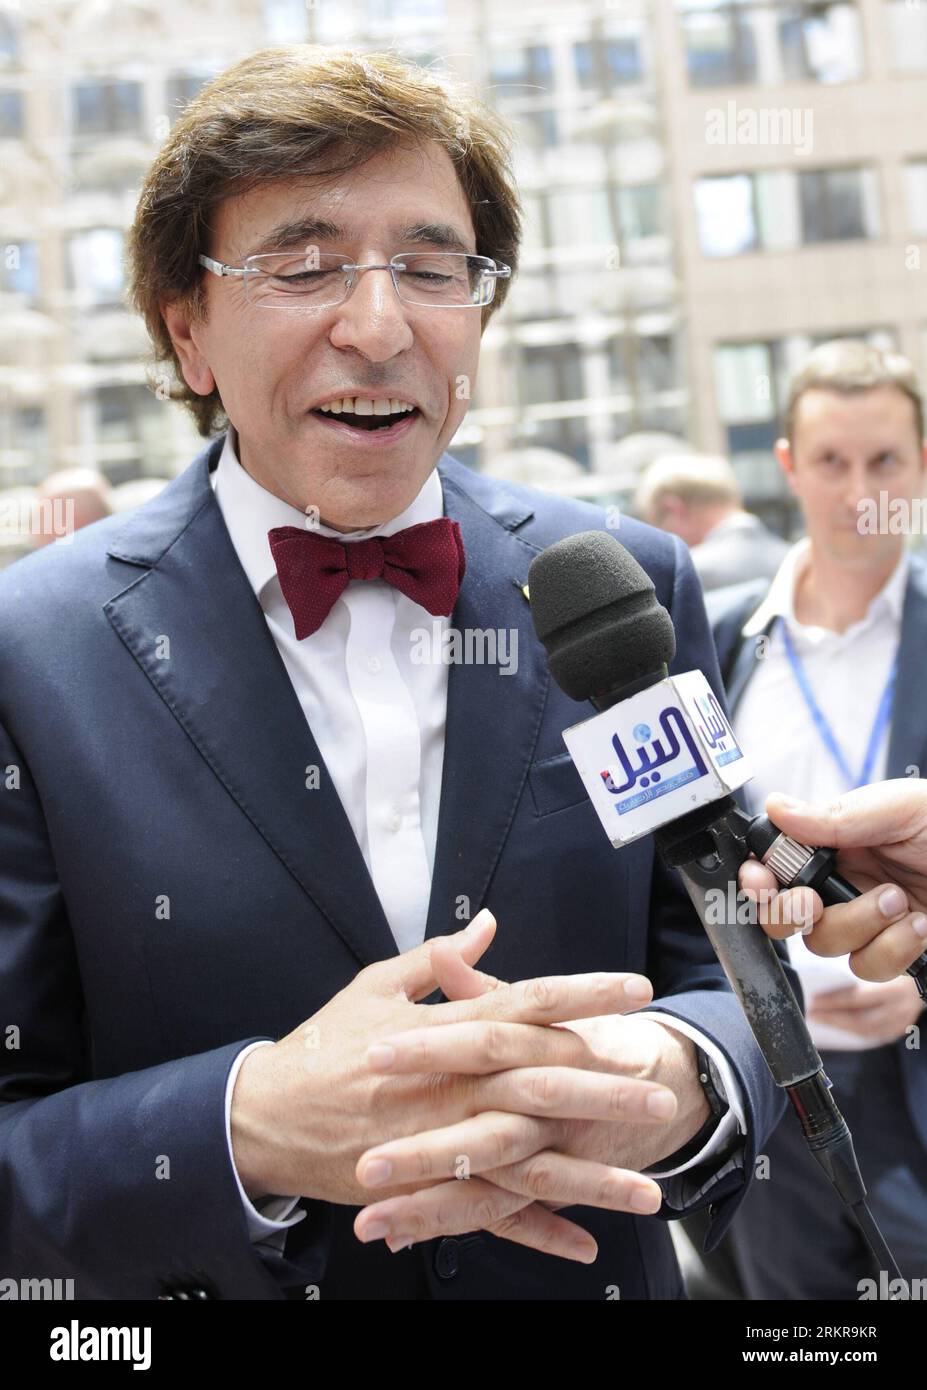 Bildnummer: 58159649  Datum: 28.06.2012  Copyright: imago/Xinhua (120628) -- BRUSSELS, June 28, 2012 (Xinhua) -- Belgian Prime Minister Elio Di Rupo arrives for the EU summit at EU s headquarters in Brussels, capital of Belgium, on June 28, 2012. European leaders are expected to focus on boosting growth and building a stronger Economic and Monetary Union (EMU) during the summit on Thursday and Friday. (Xinhua/Alyssa Goodman)(ypf) BELGIUM-EU-SUMMIT PUBLICATIONxNOTxINxCHN People Politik Gipfel Gipfeltreffen Porträt premiumd xns x0x 2012 hoch      58159649 Date 28 06 2012 Copyright Imago XINHUA Stock Photo